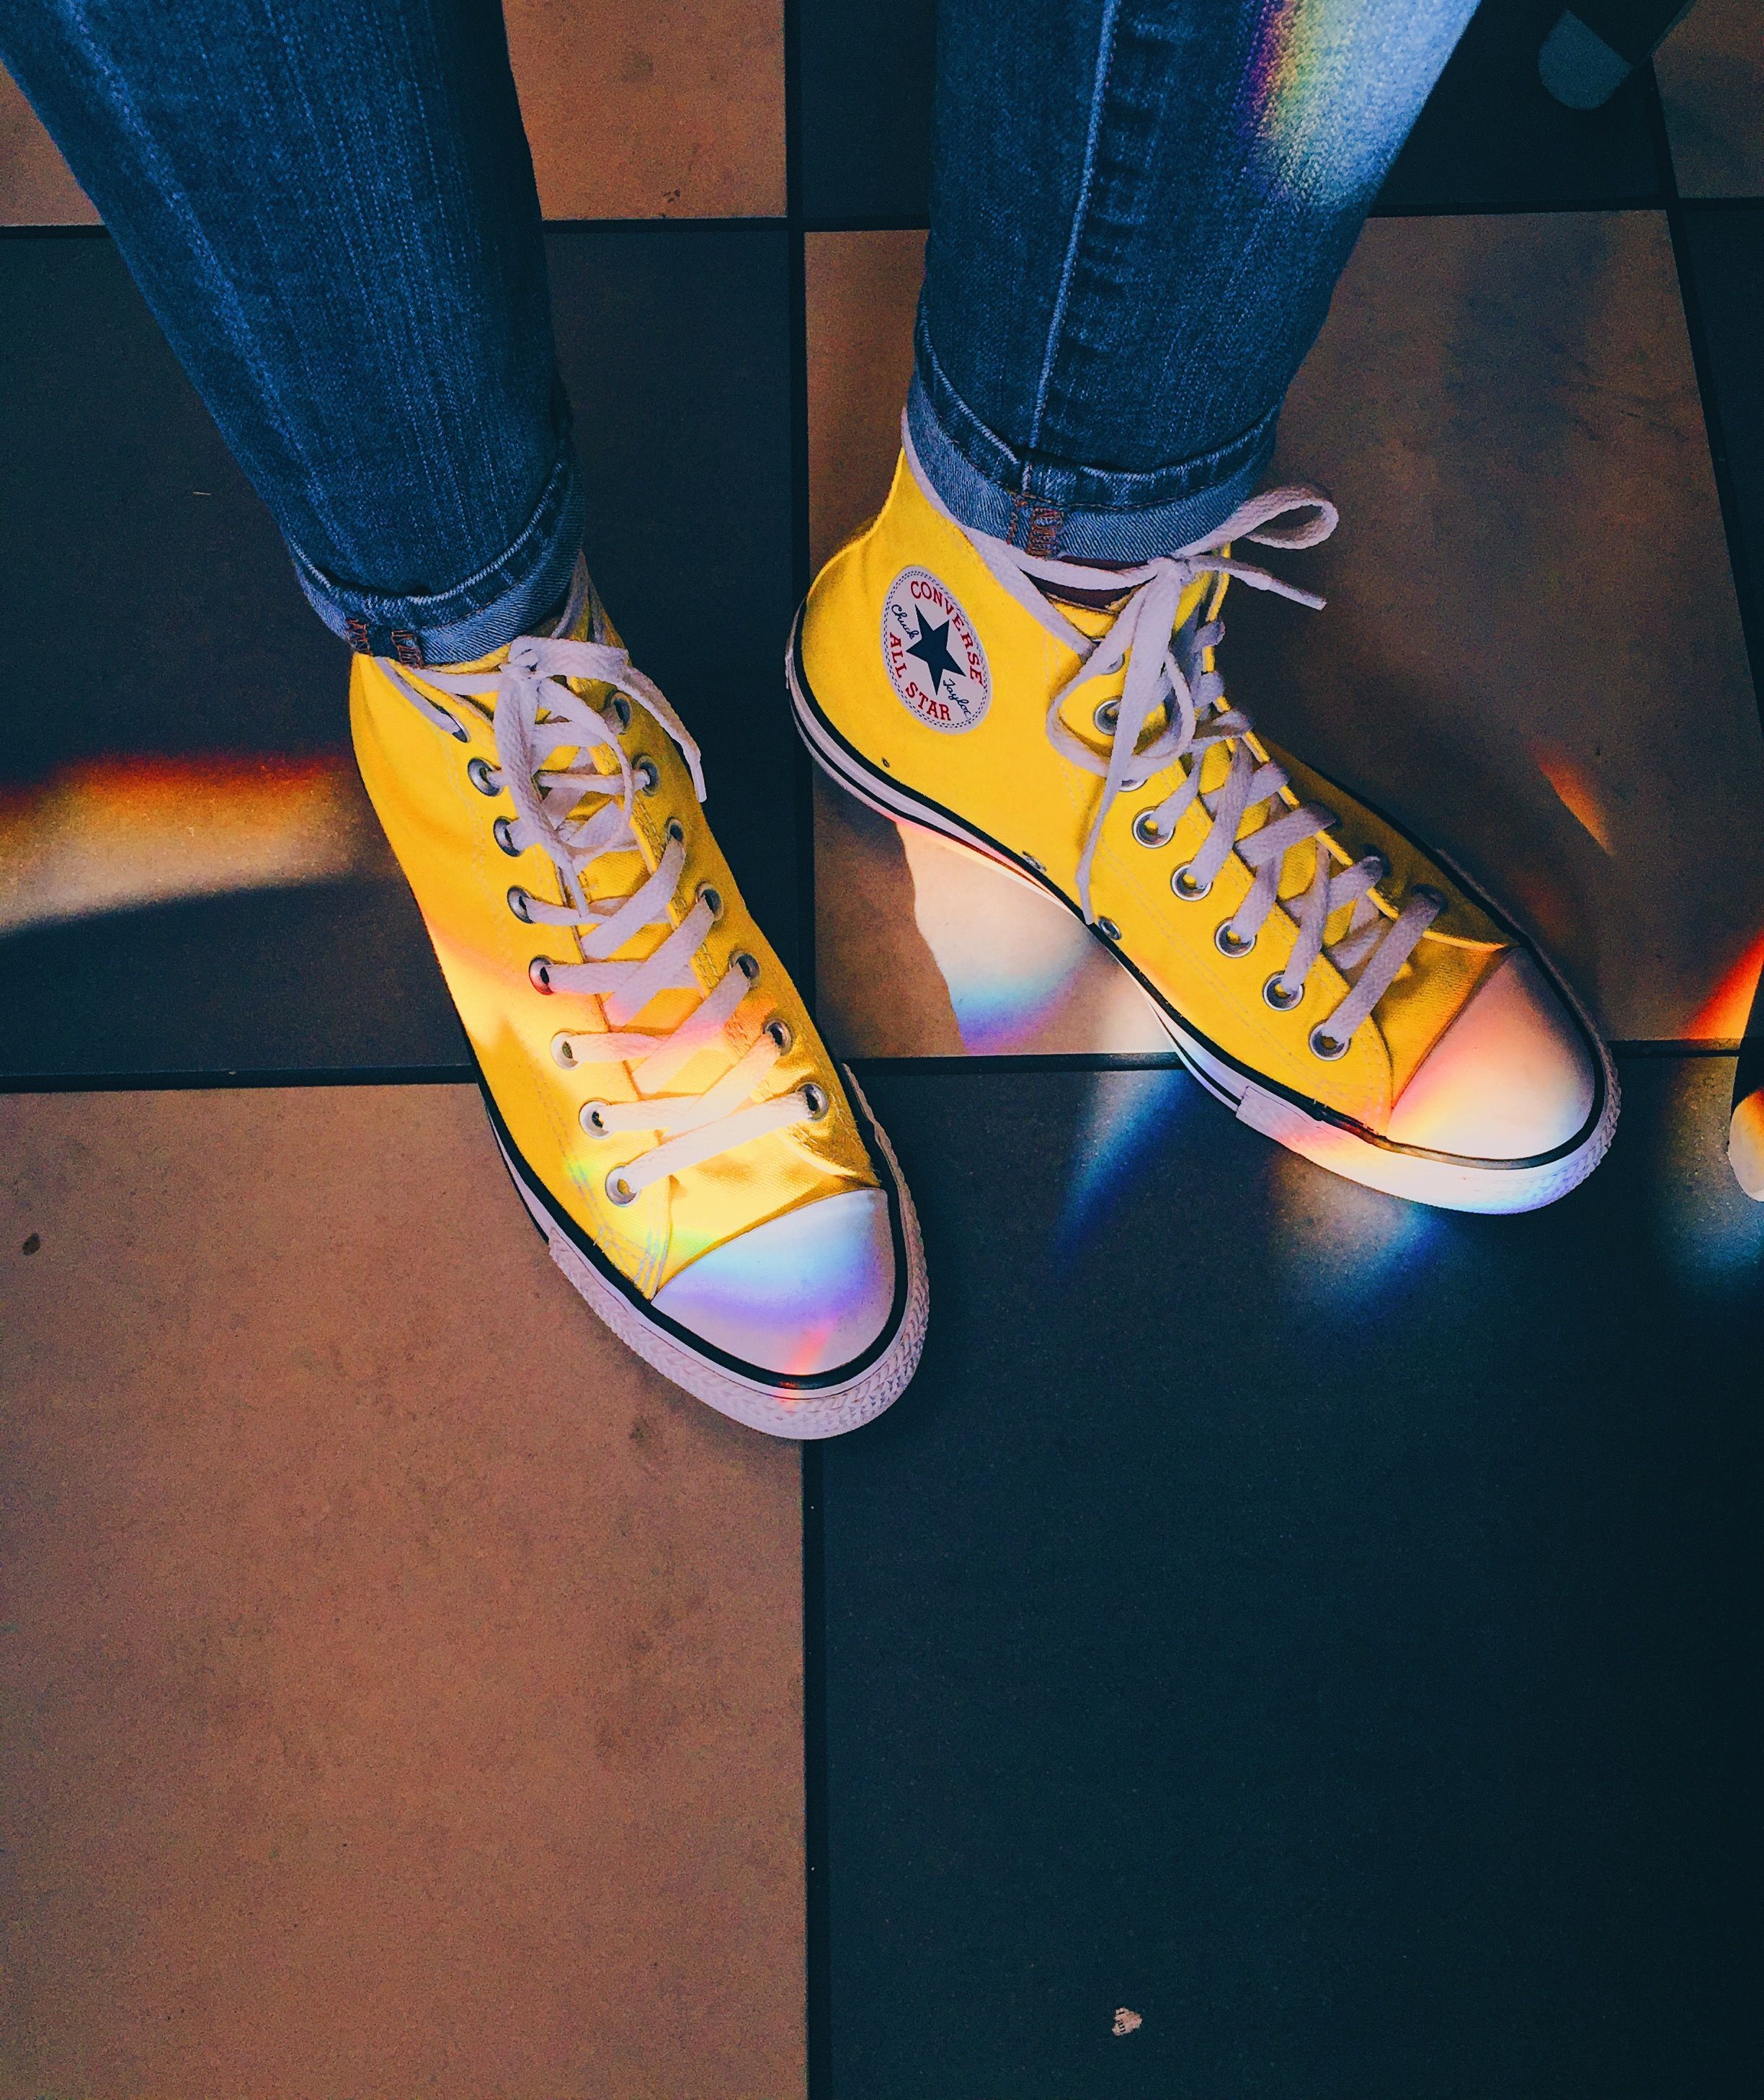 A person wearing yellow converse shoes - Shoes, Converse